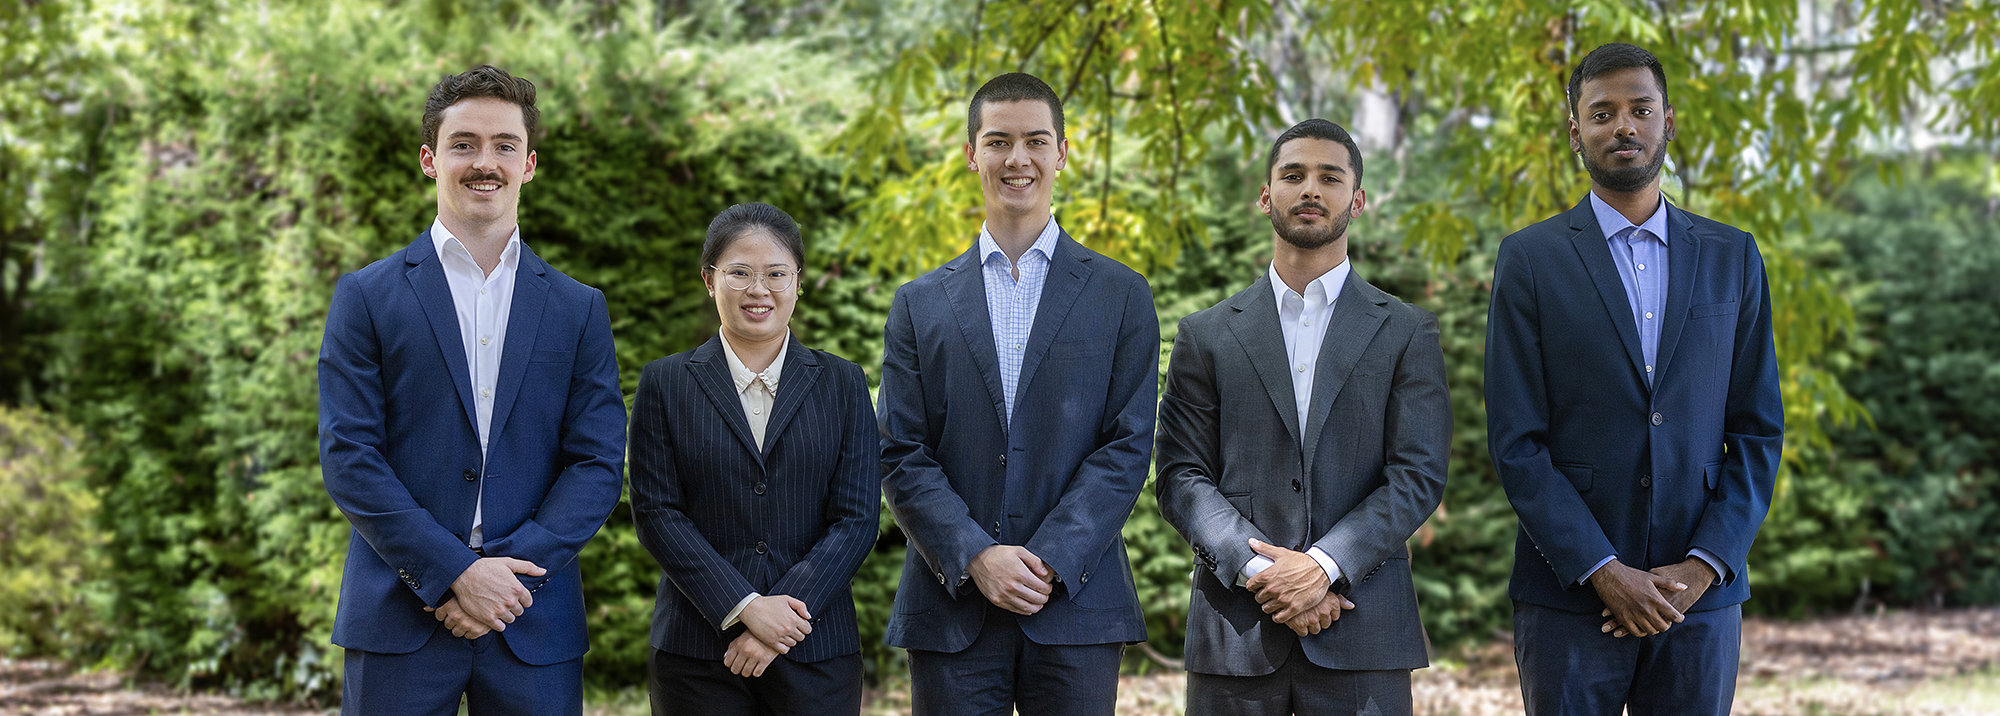 Student Managed Fund - risk and compliance team